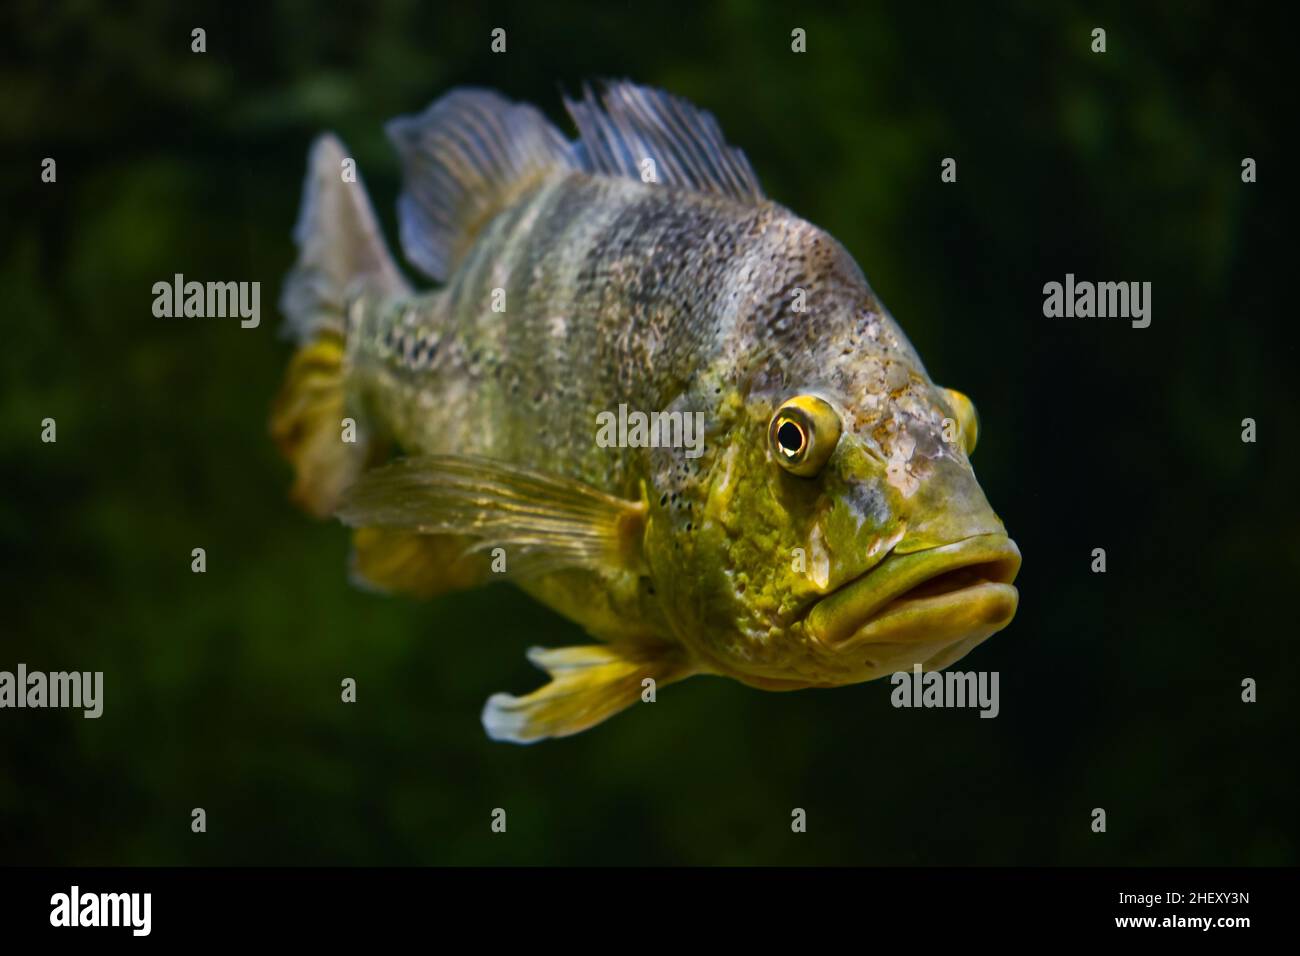 The butterfly peacock bass fish swims in water. Cichla ocellaris Orinoco Peacock Bass fish. Stock Photo